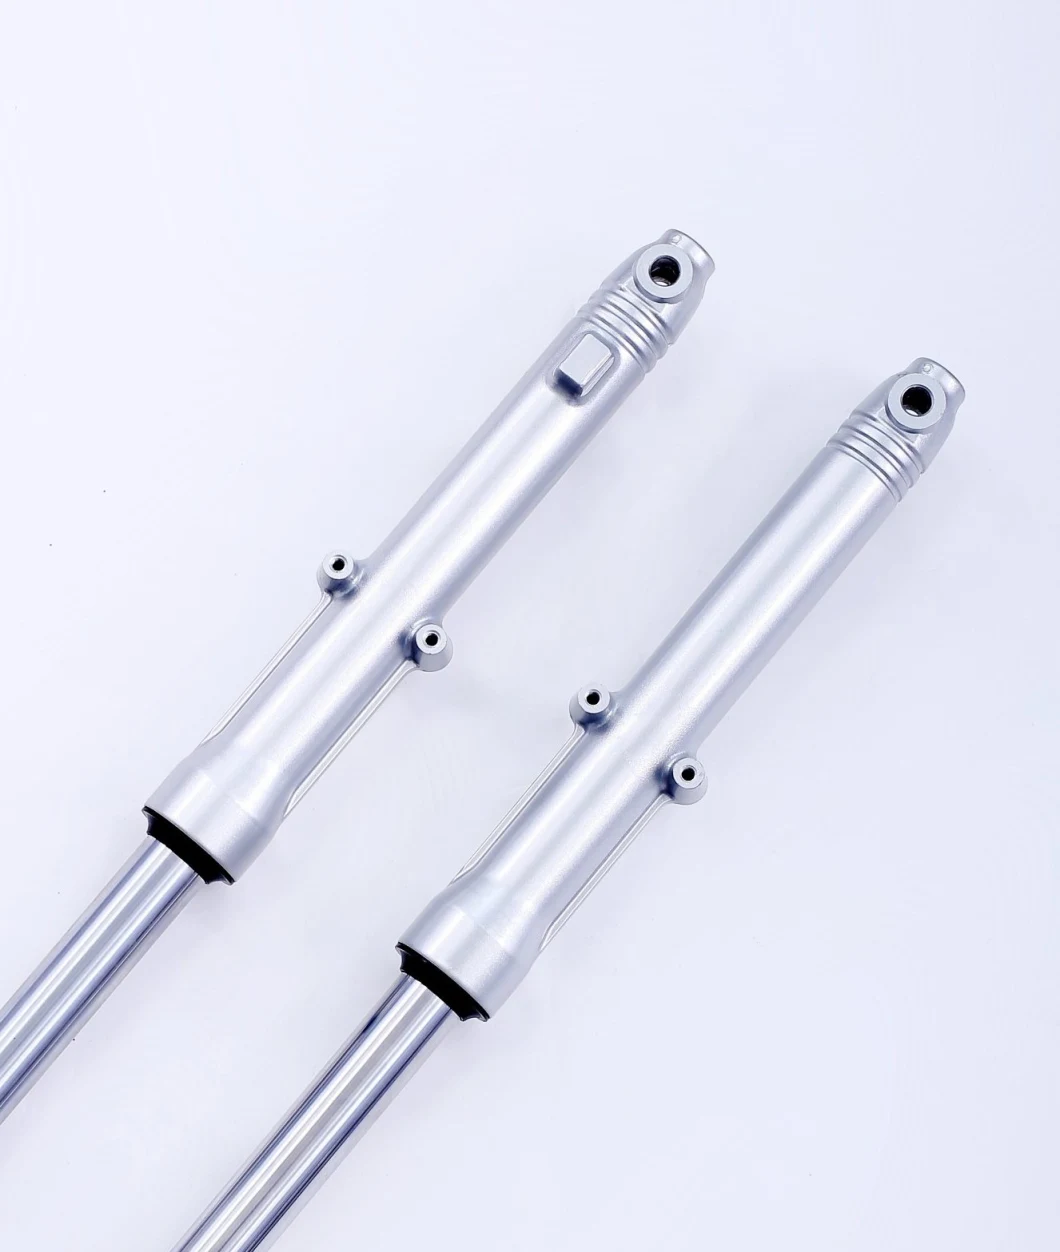 Front Shock Absorber Front Forks for E-Scooter, E-Bike, Motorbike, Motorcycle, Electric Scooter